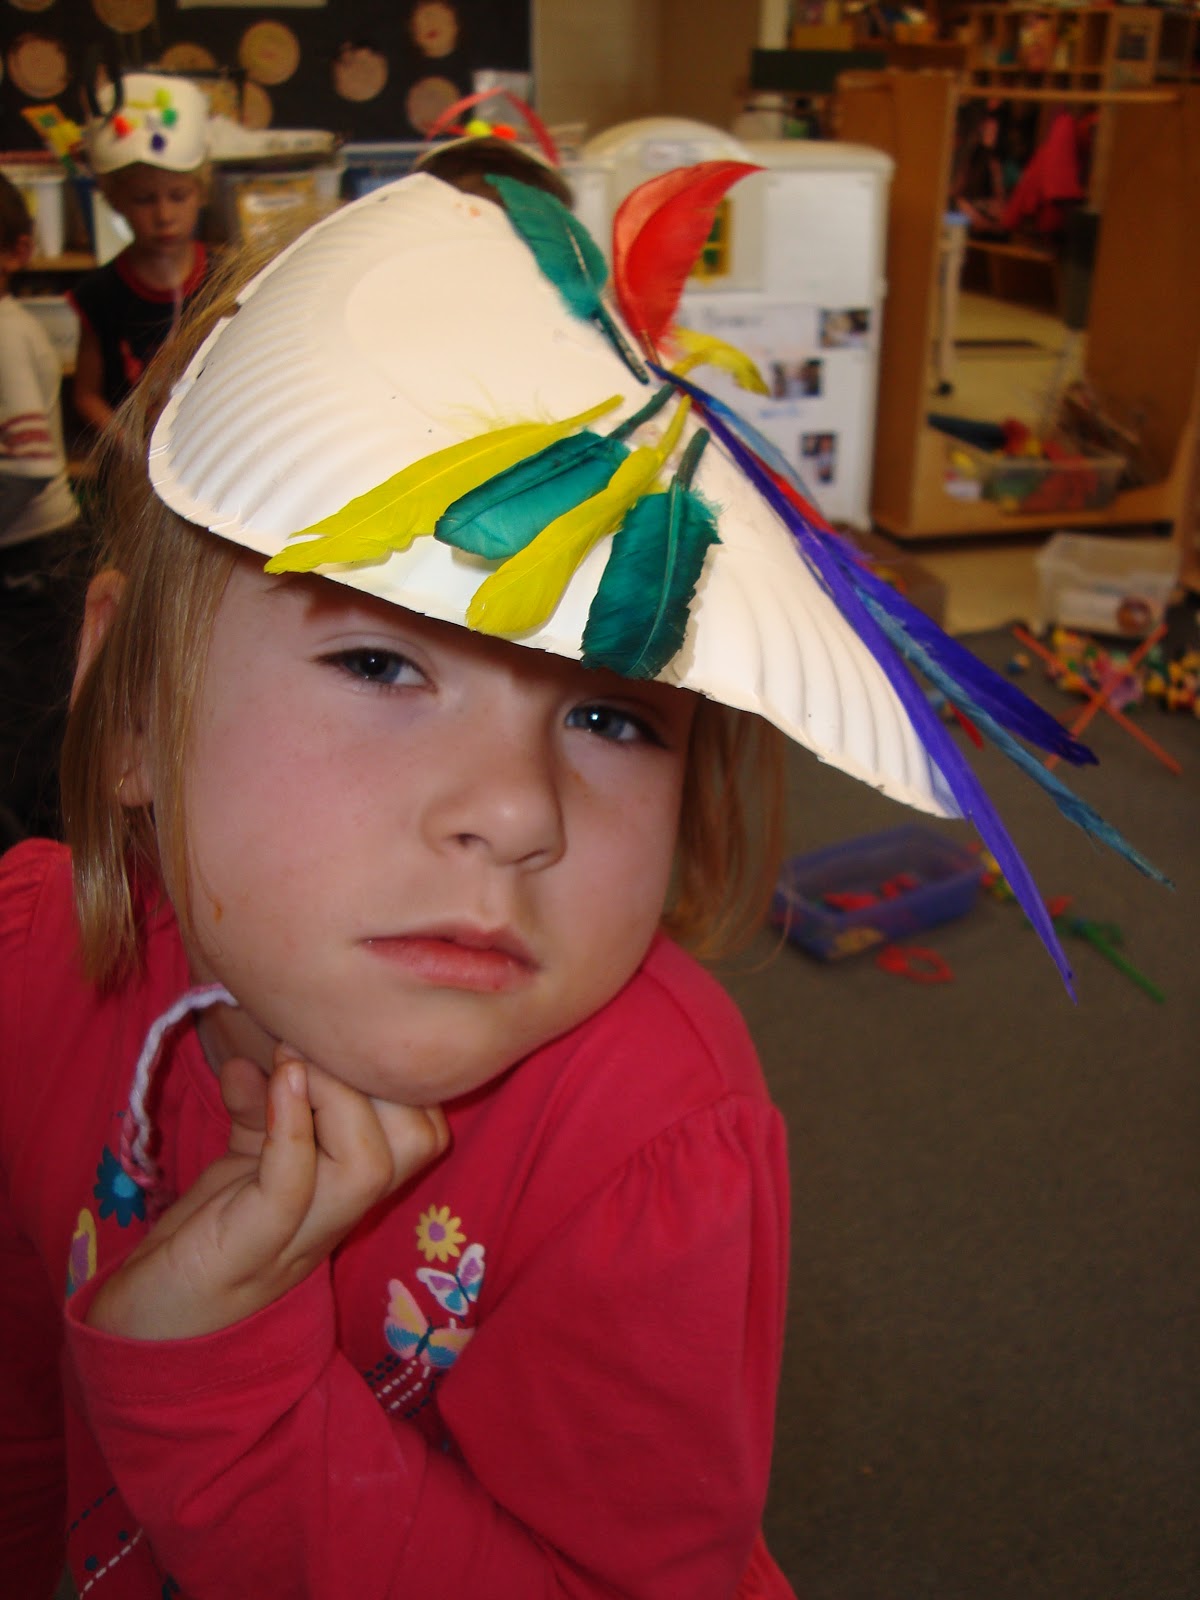 Joyful Learning in the Early Years: Crazy Hats